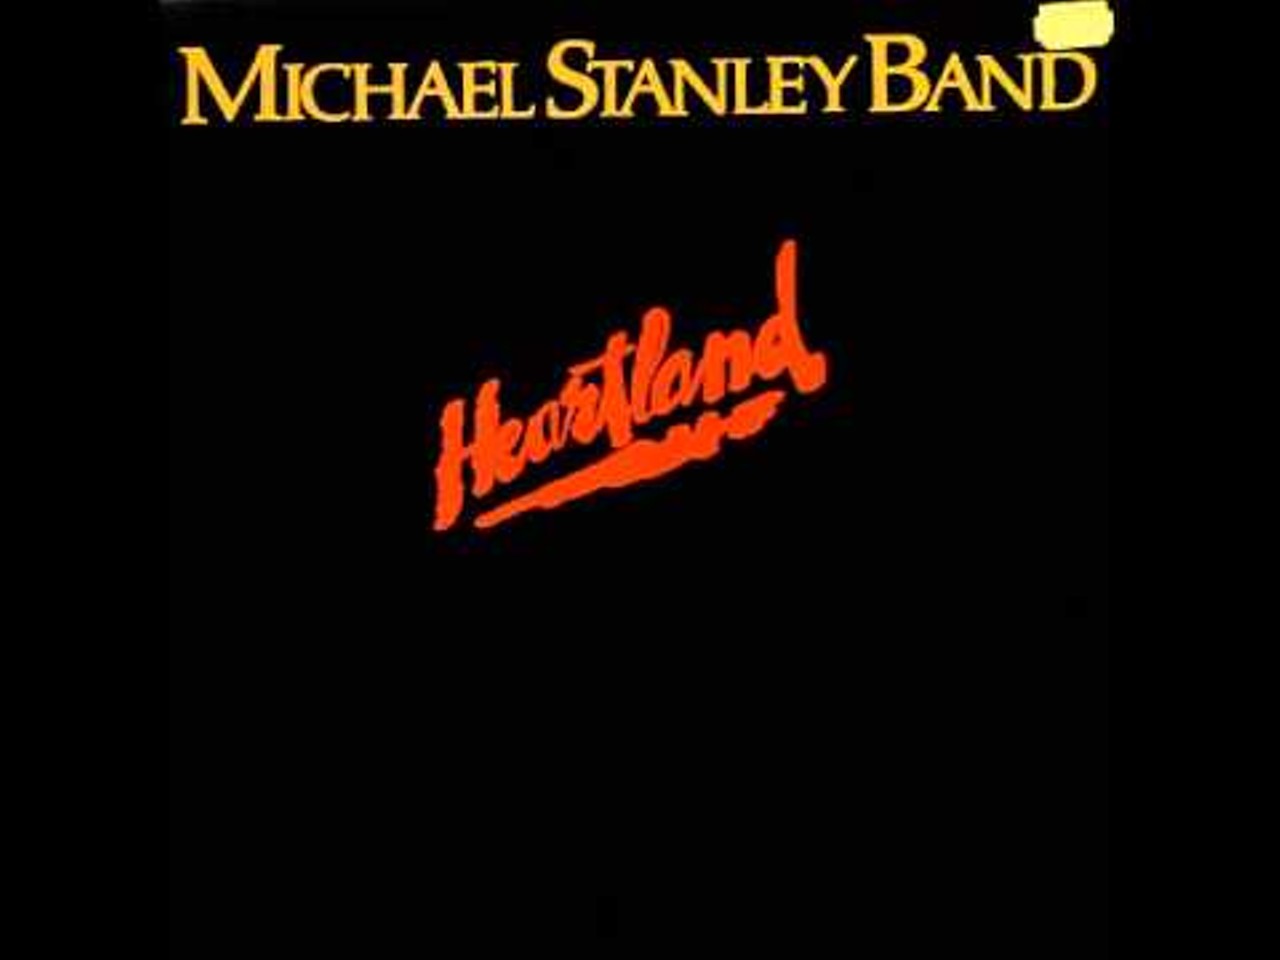  2. Michael Stanley Band, &#147;Lover&#148; 